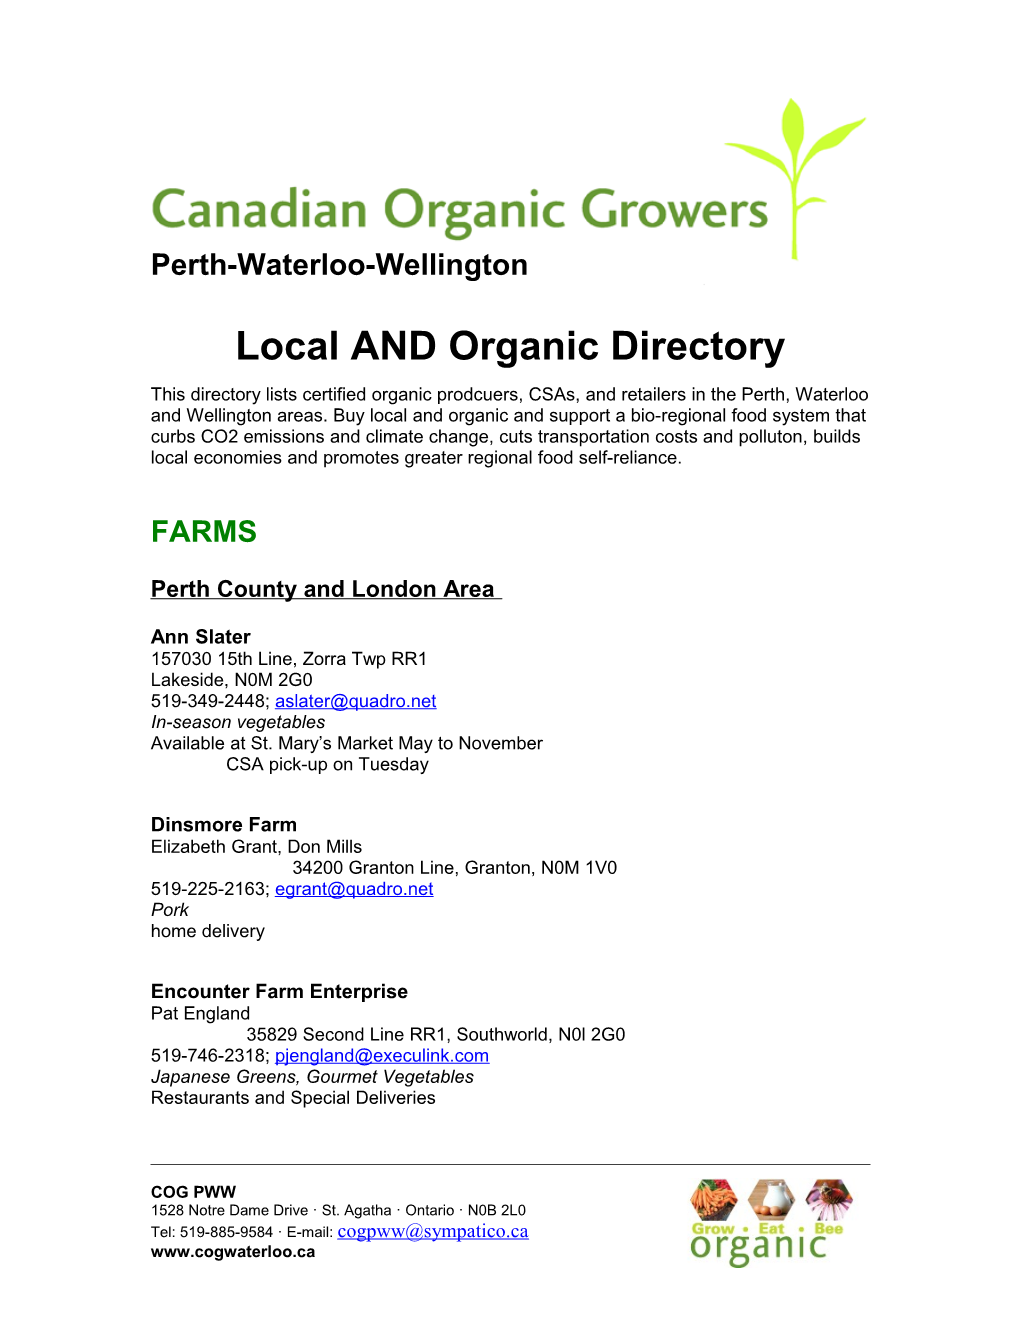 Local and Organic Directory